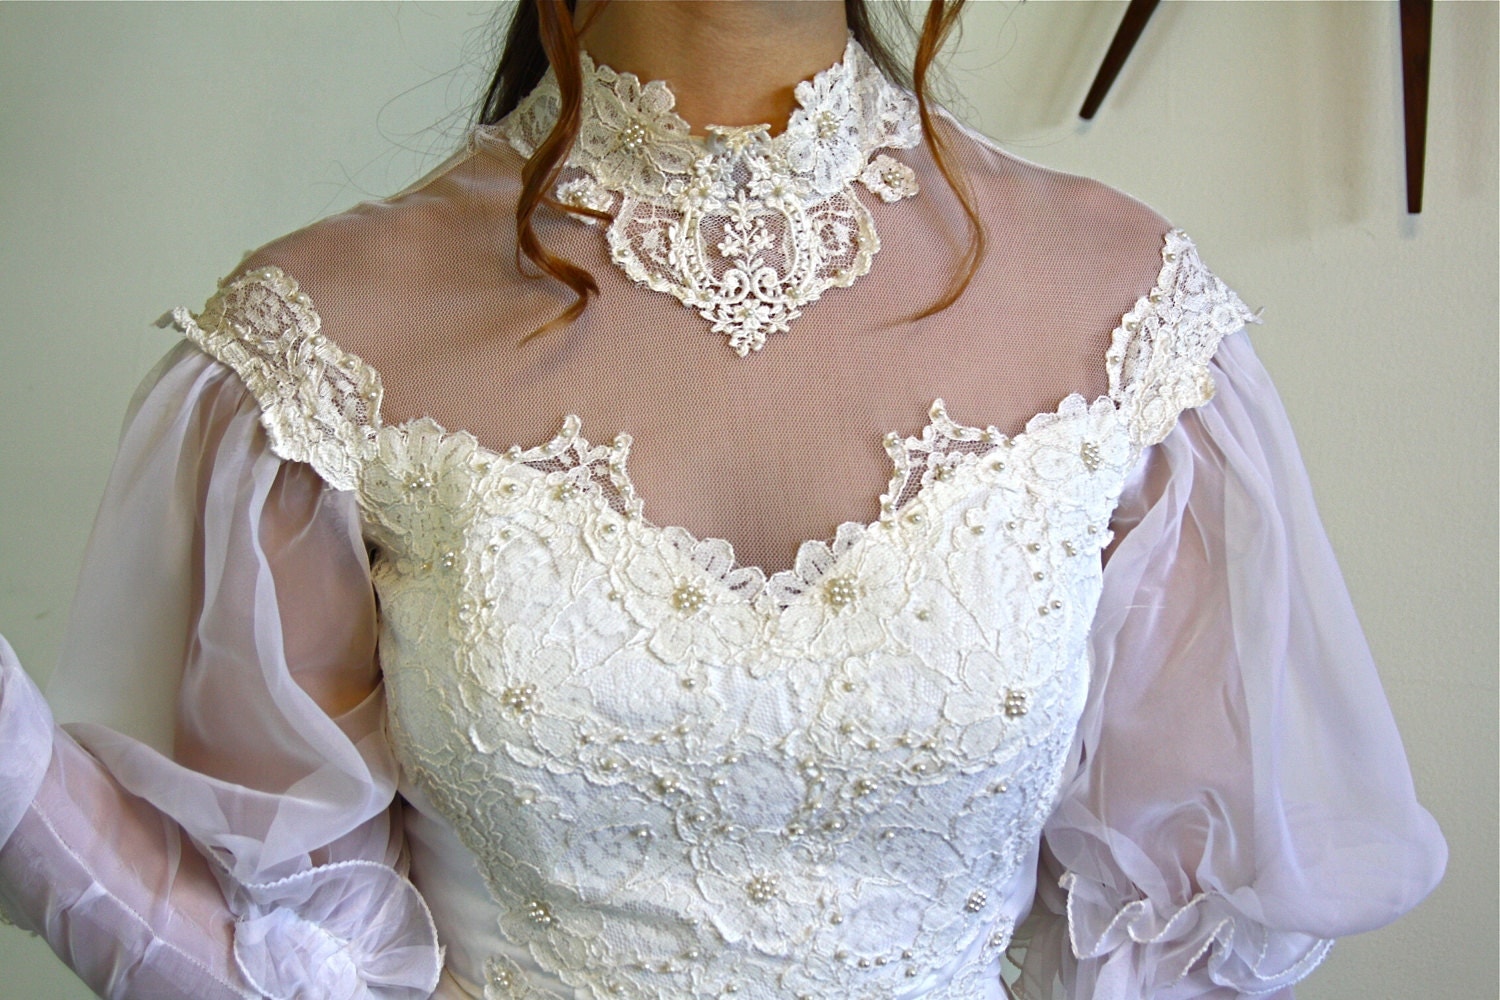 Victorian Wedding 70s Bridal Gown Antique Lace Gown Sheer Sleeves High Lace Collar Vintage 5350